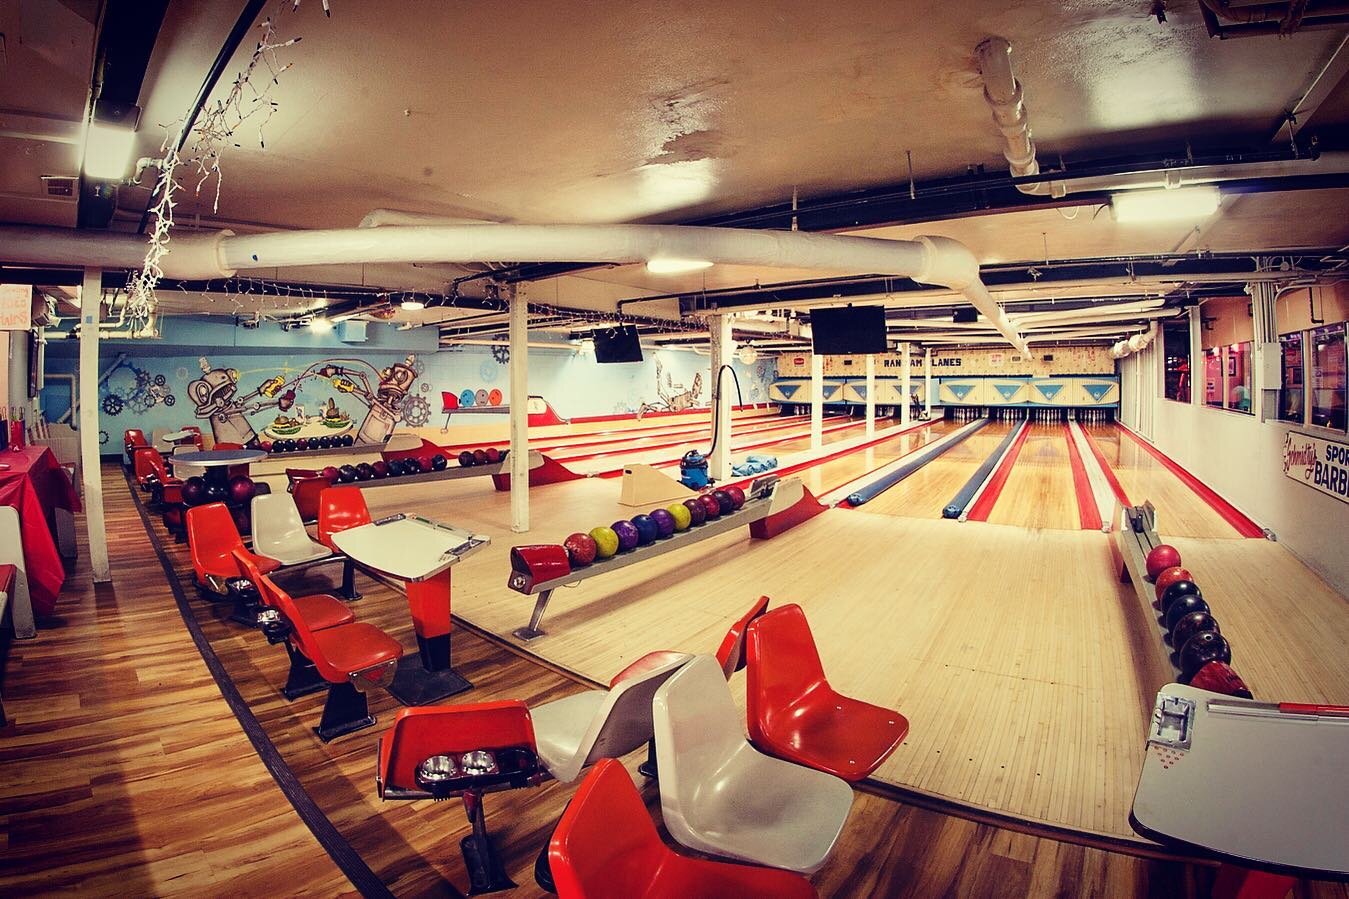 Attention all distance-learning folks: Need a new idea for phy ed?? Sick of making lunches?? Do we have the solution for you! Lunch &amp; bowling at RanHam! Bonus: we score by hand so there&rsquo;s a little math in there as well! Worried about crowds